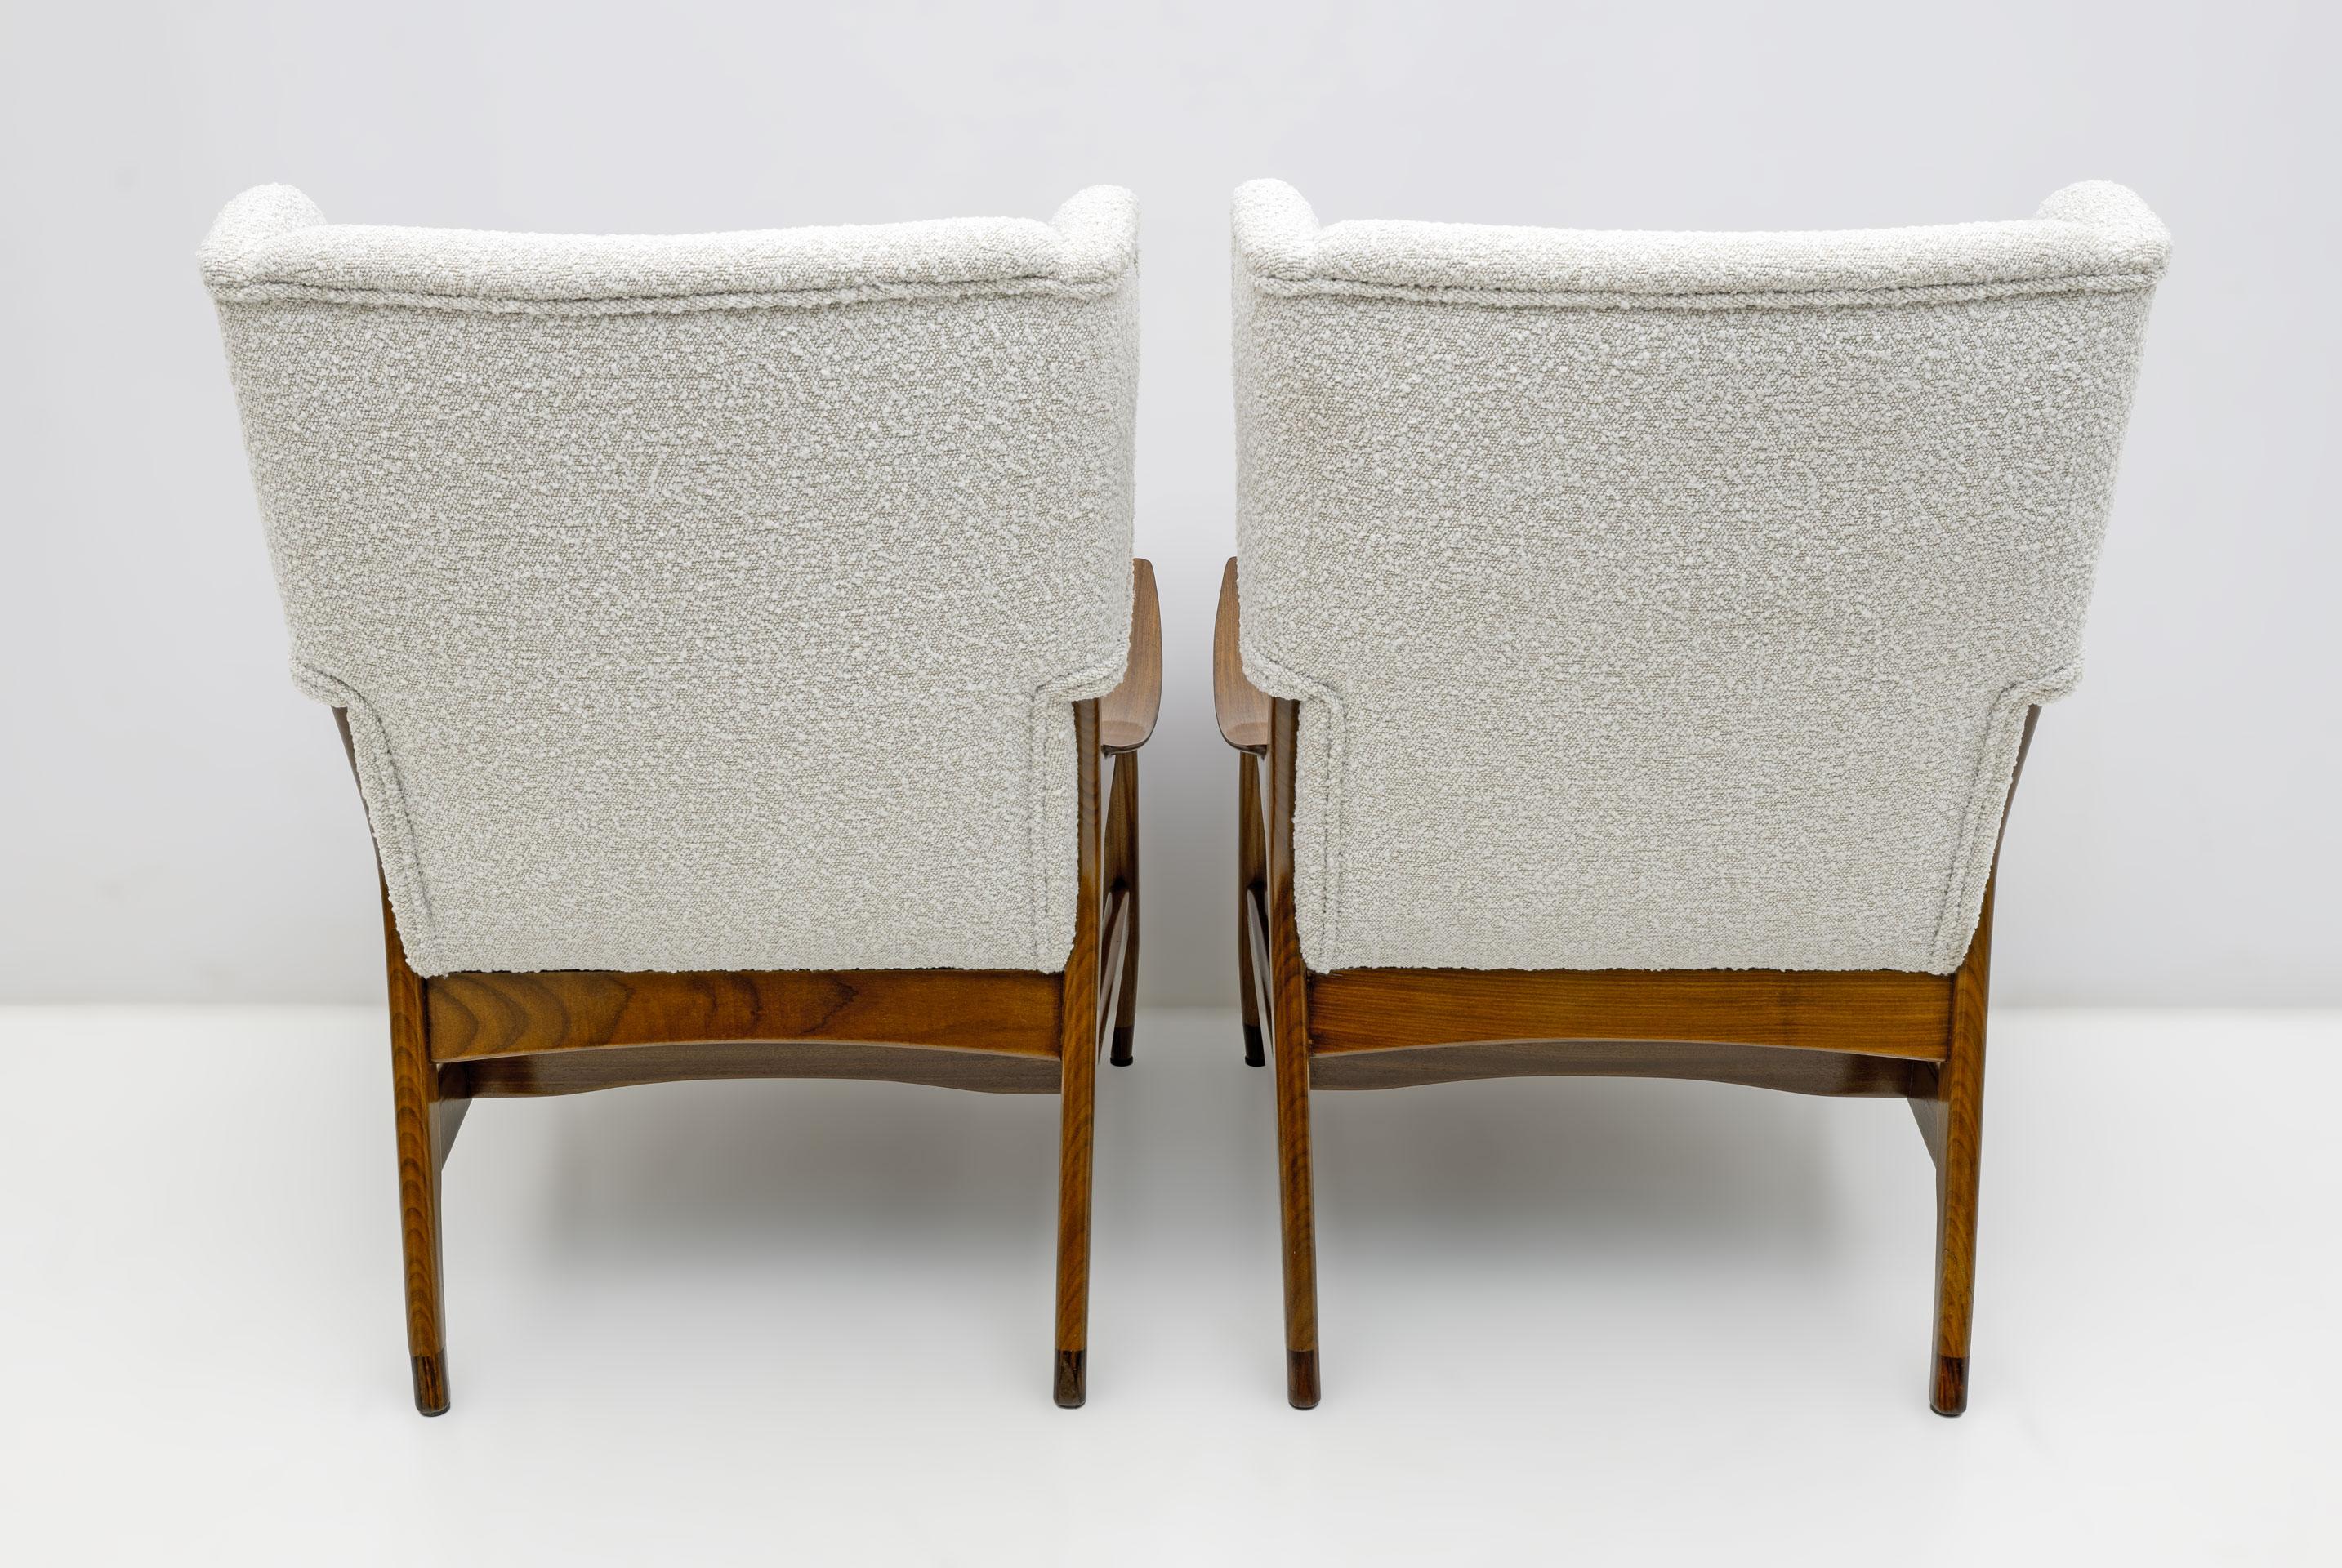 Pair of Mid-Century Modern Teak and Bouclè Armchairs Model FM 106 by Framar, 50s For Sale 3